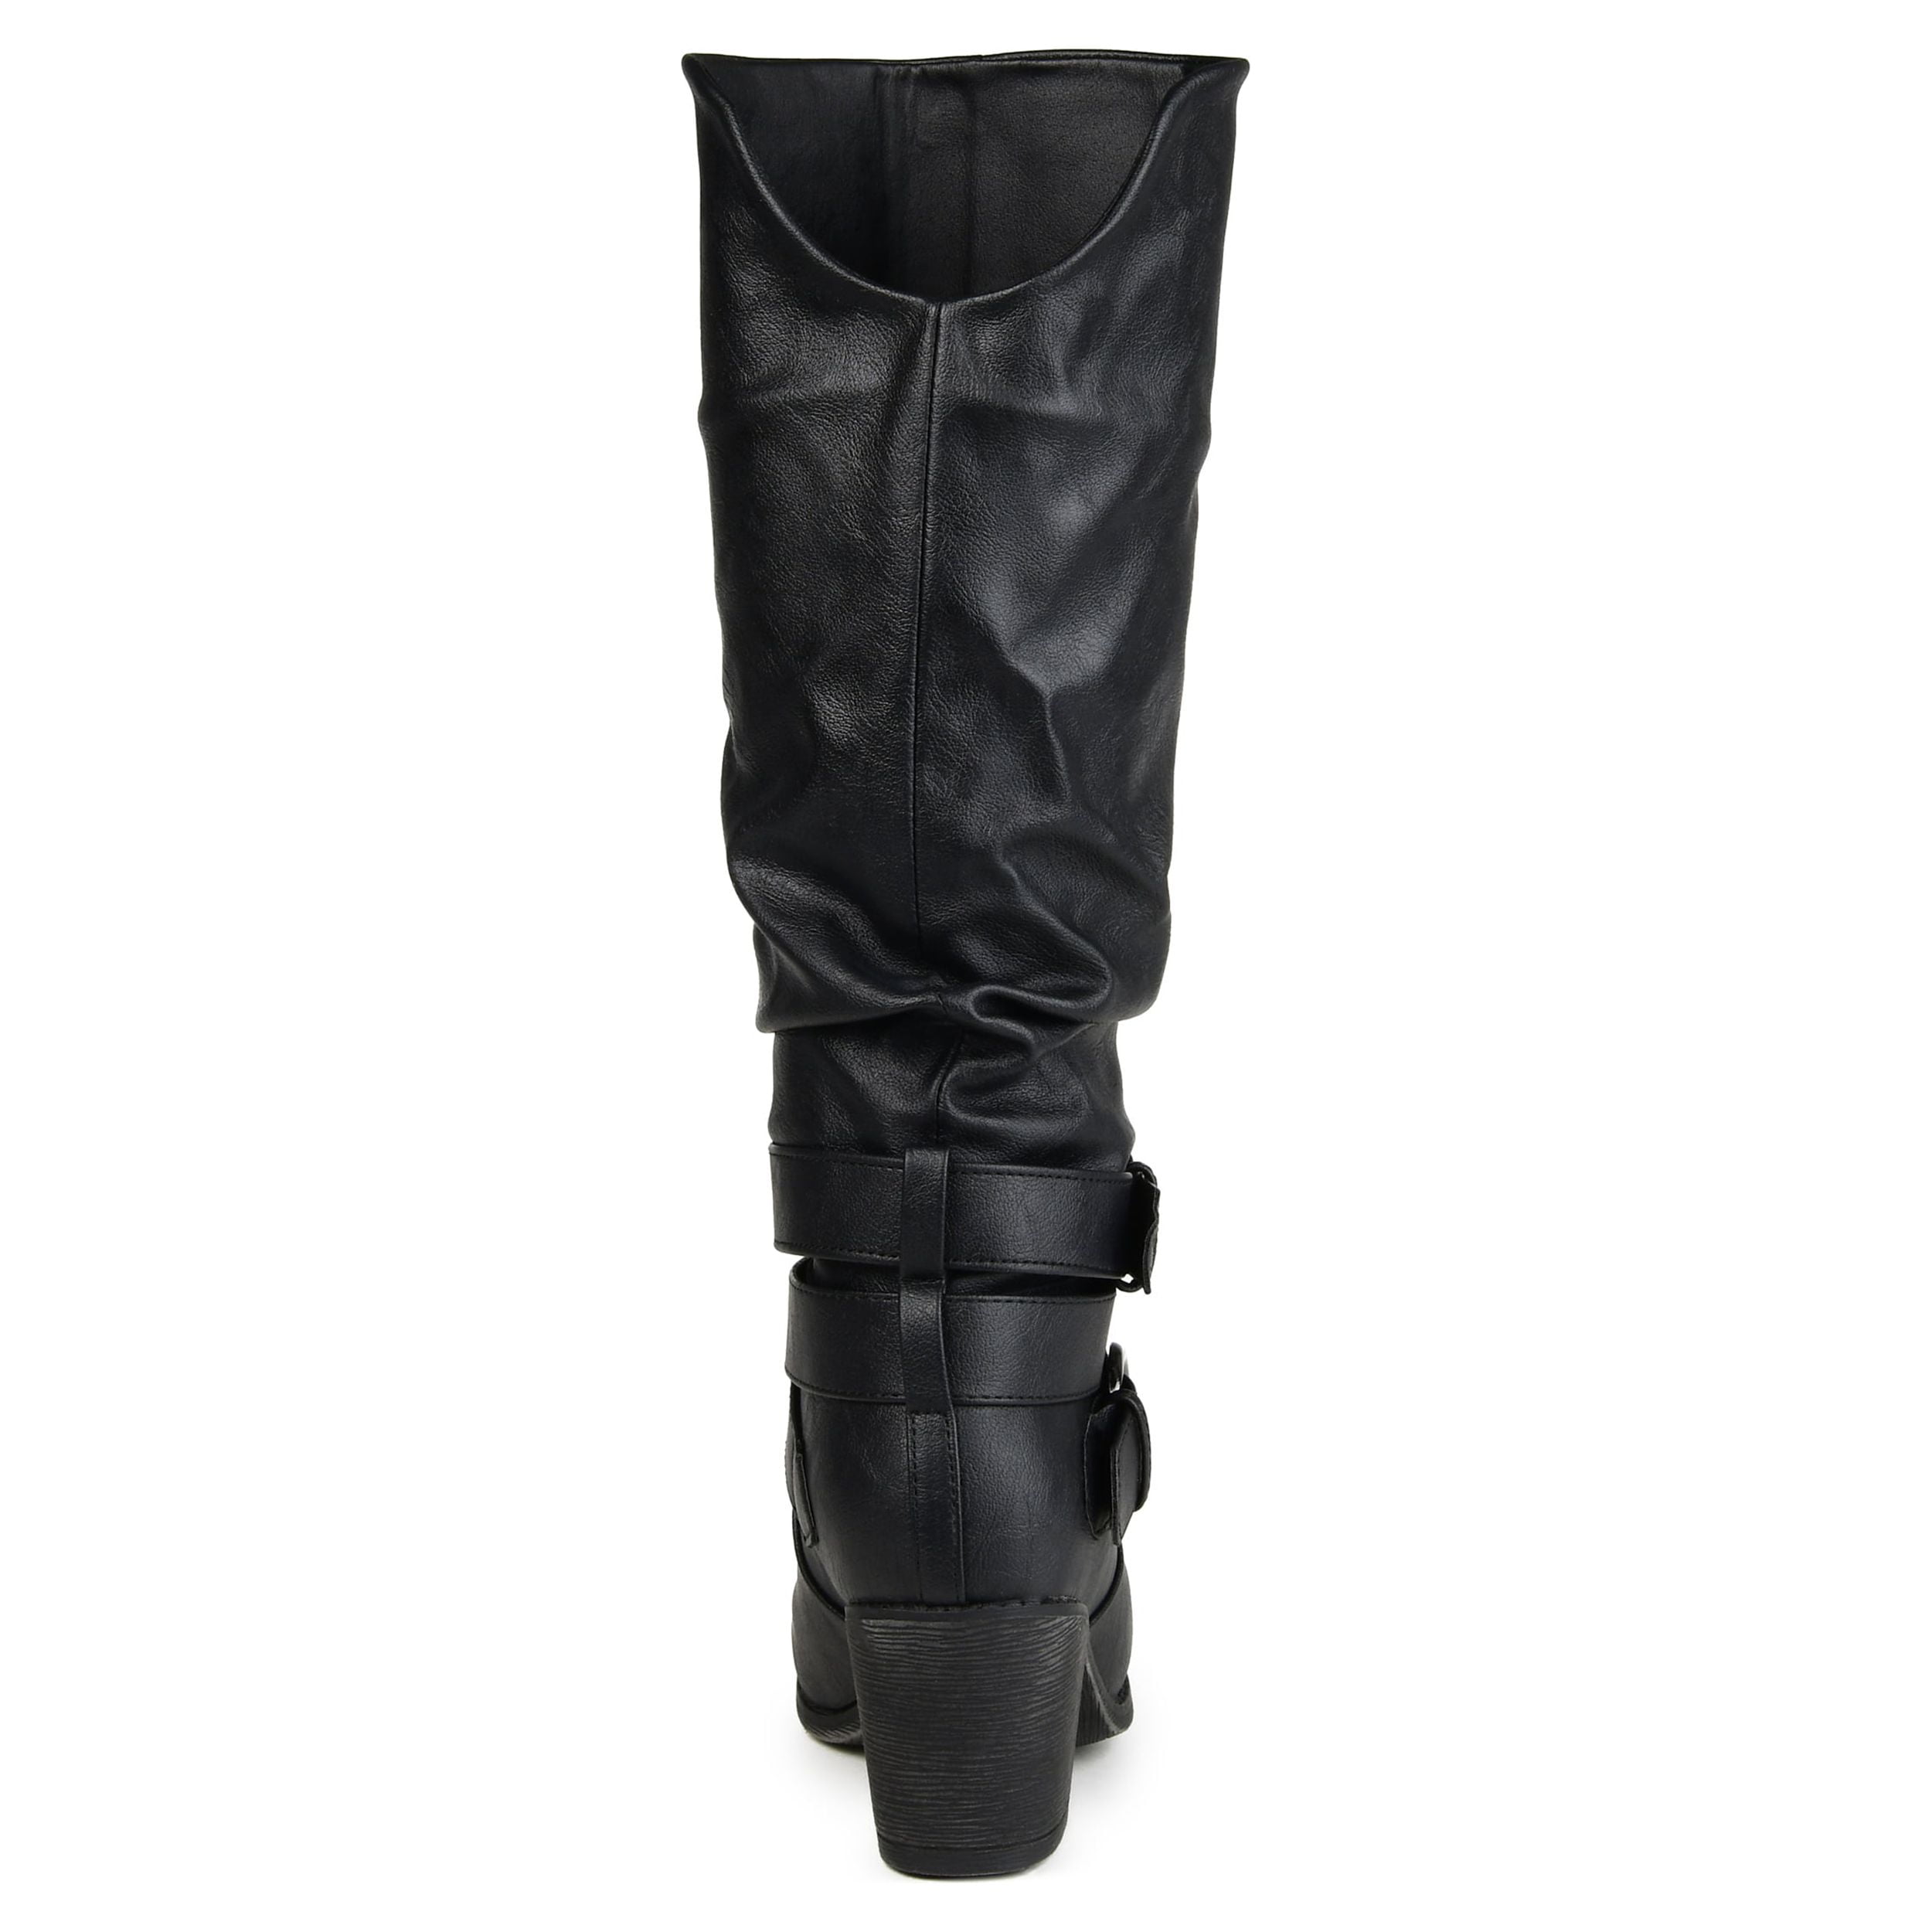 Brinley Co. Women's Extra Wide Calf Knee High Faux Leather Riding